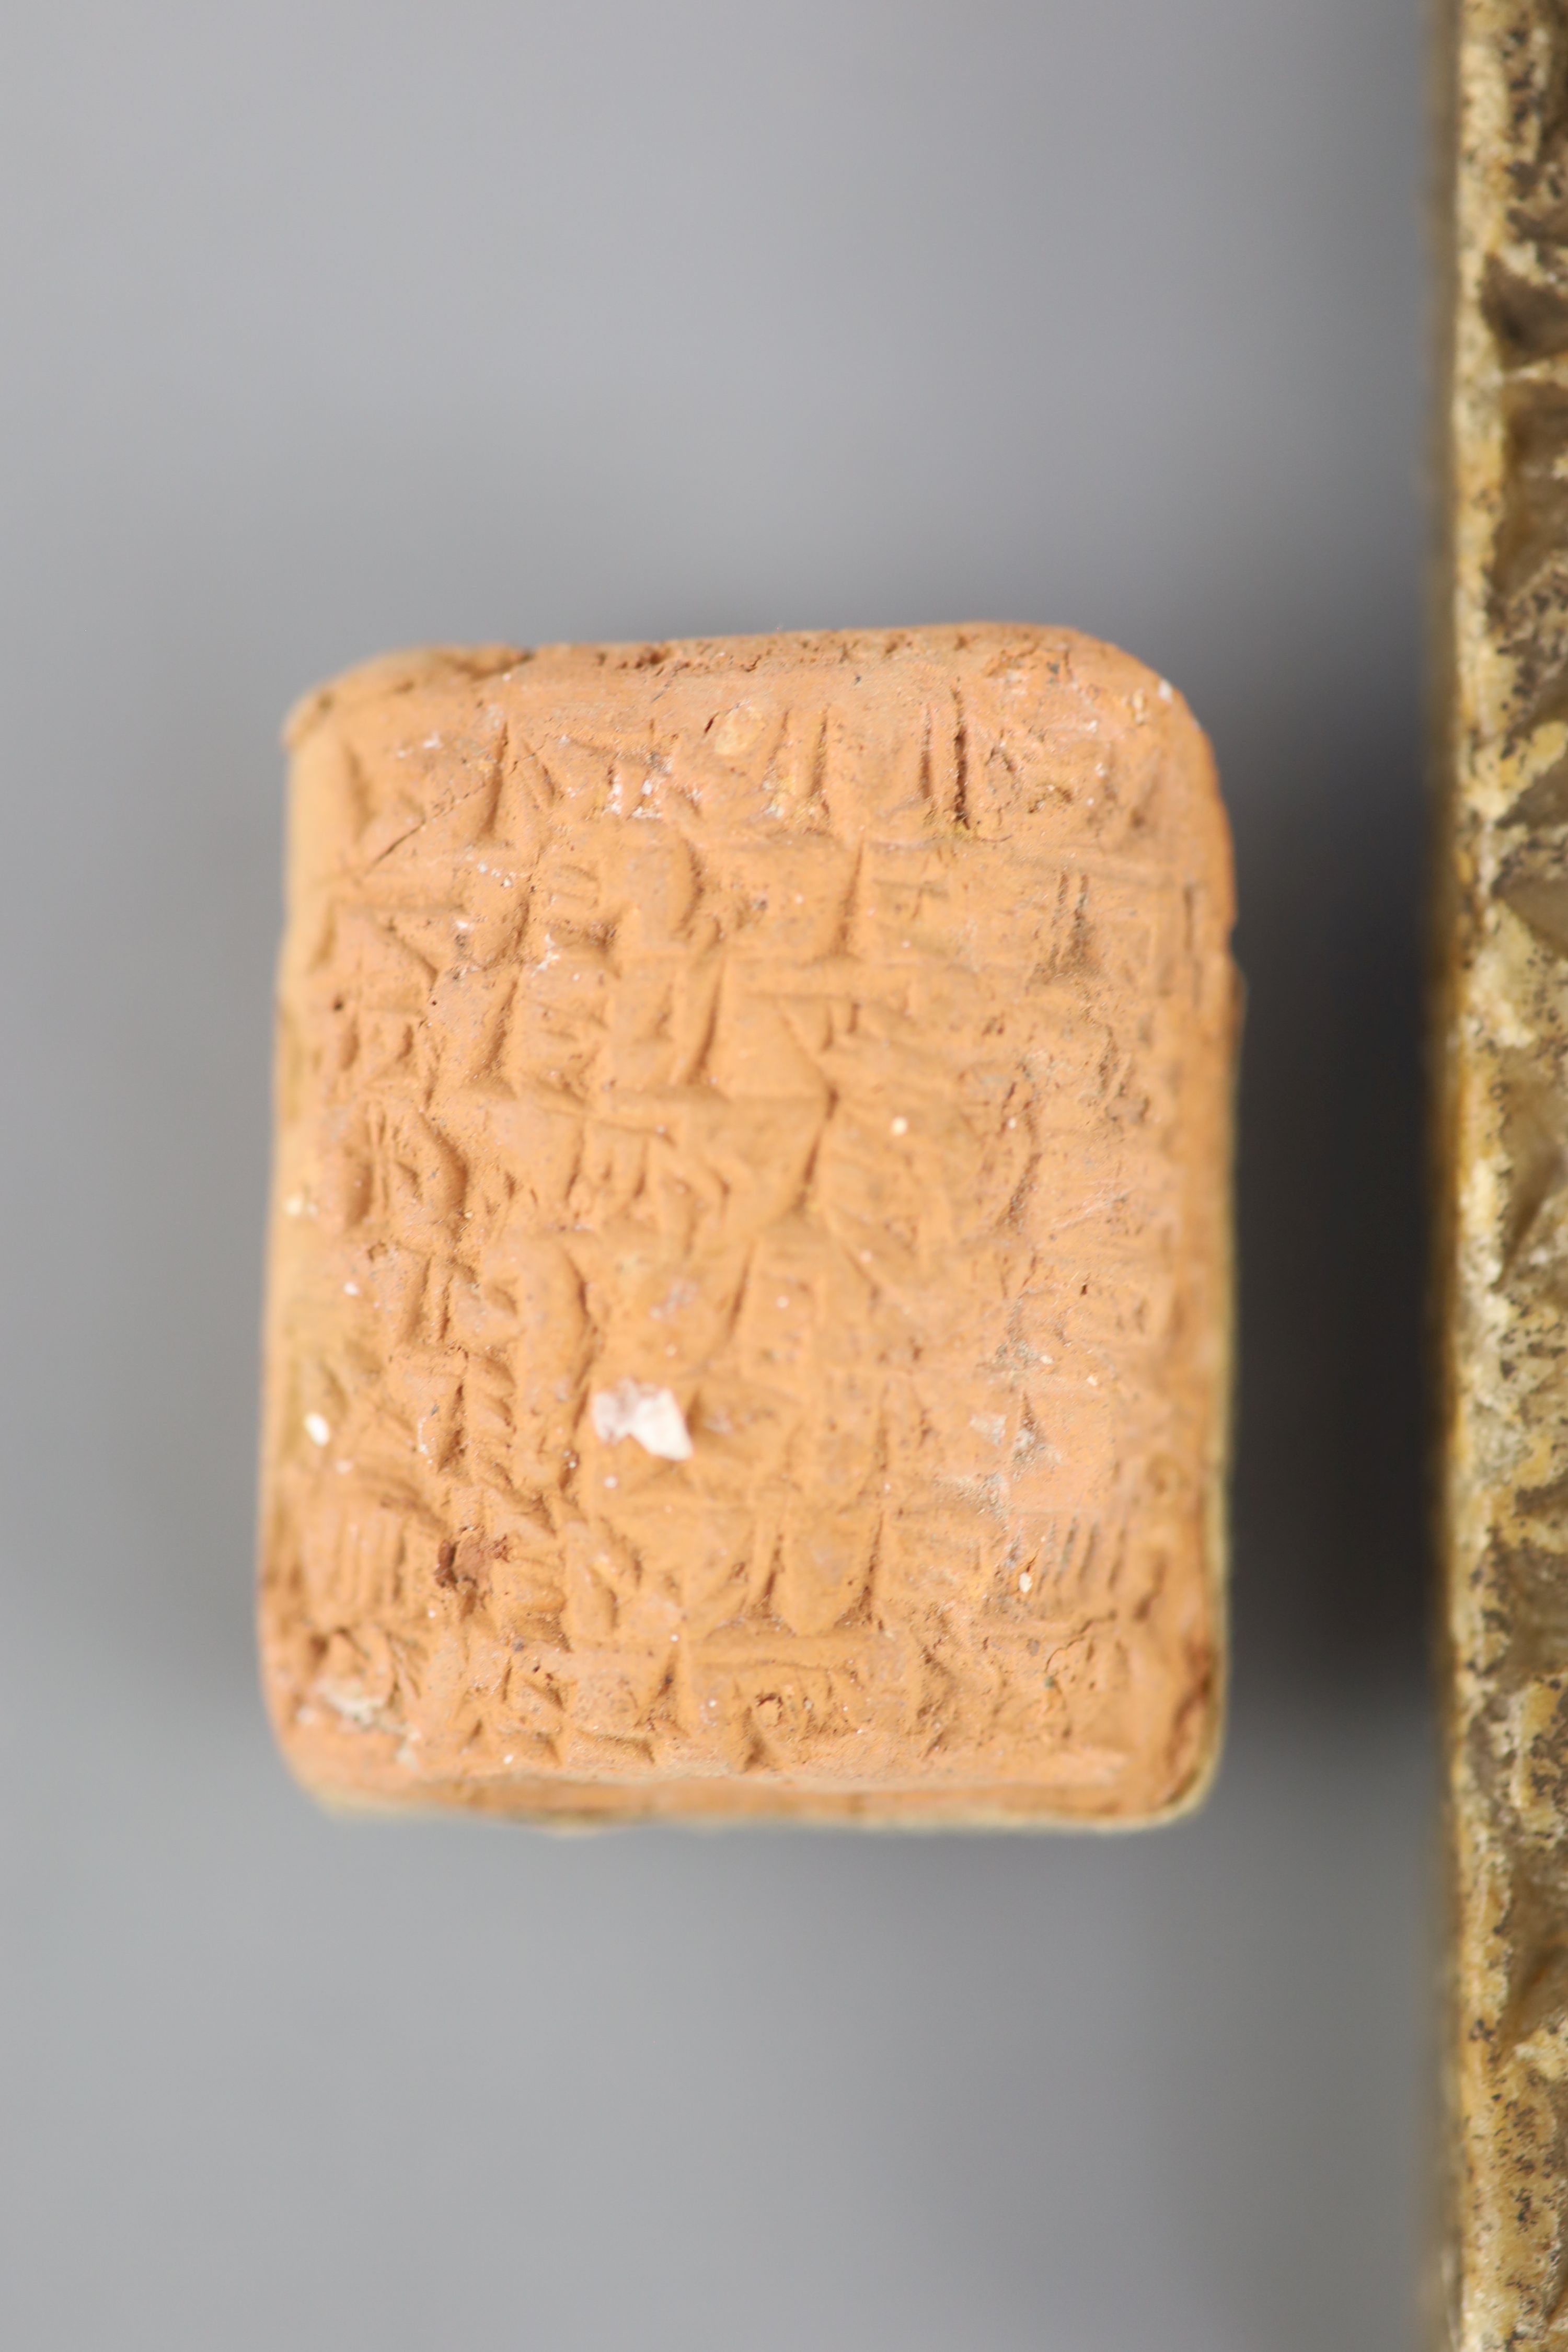 An Ancient Assyrian fragment of a cuneiform alabaster slab, probably 9th century BC from Kouyunjik (Nineveh) and two clay cuneiform tab